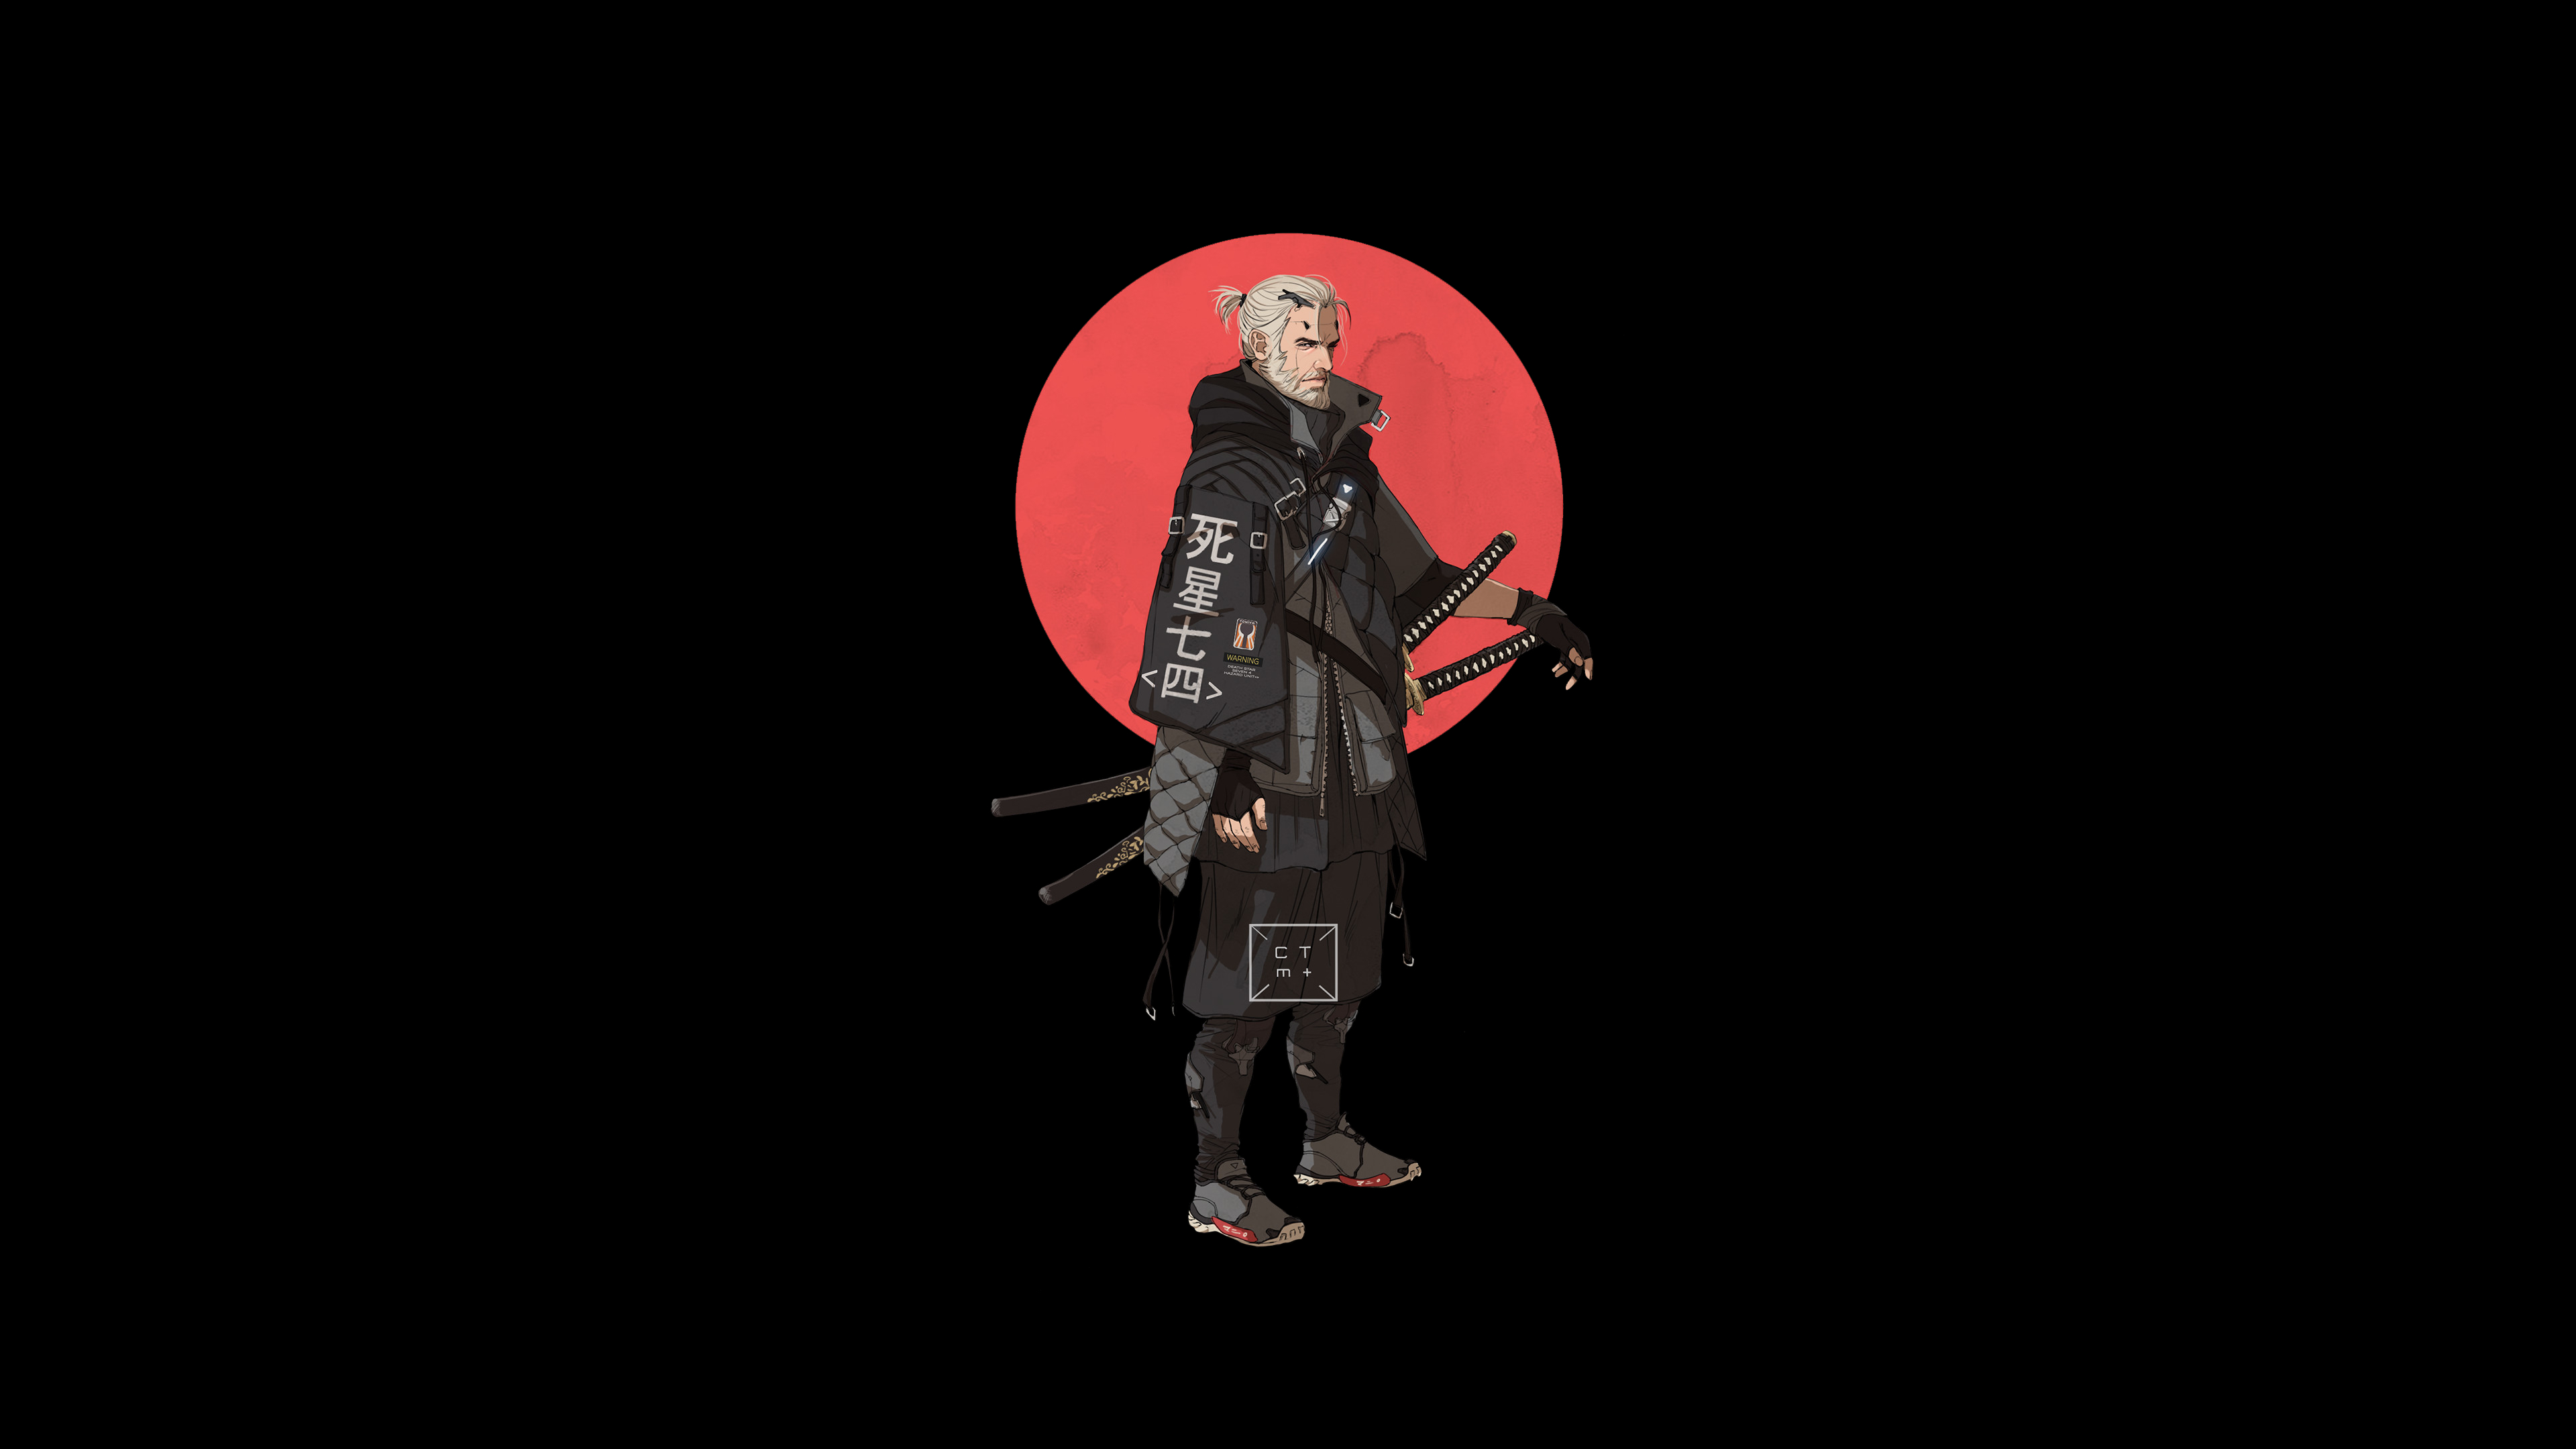 Geralt Witcher Minimal 4k Wallpaper Hd Minimalist 4k Wallpapers Images Photos And Background